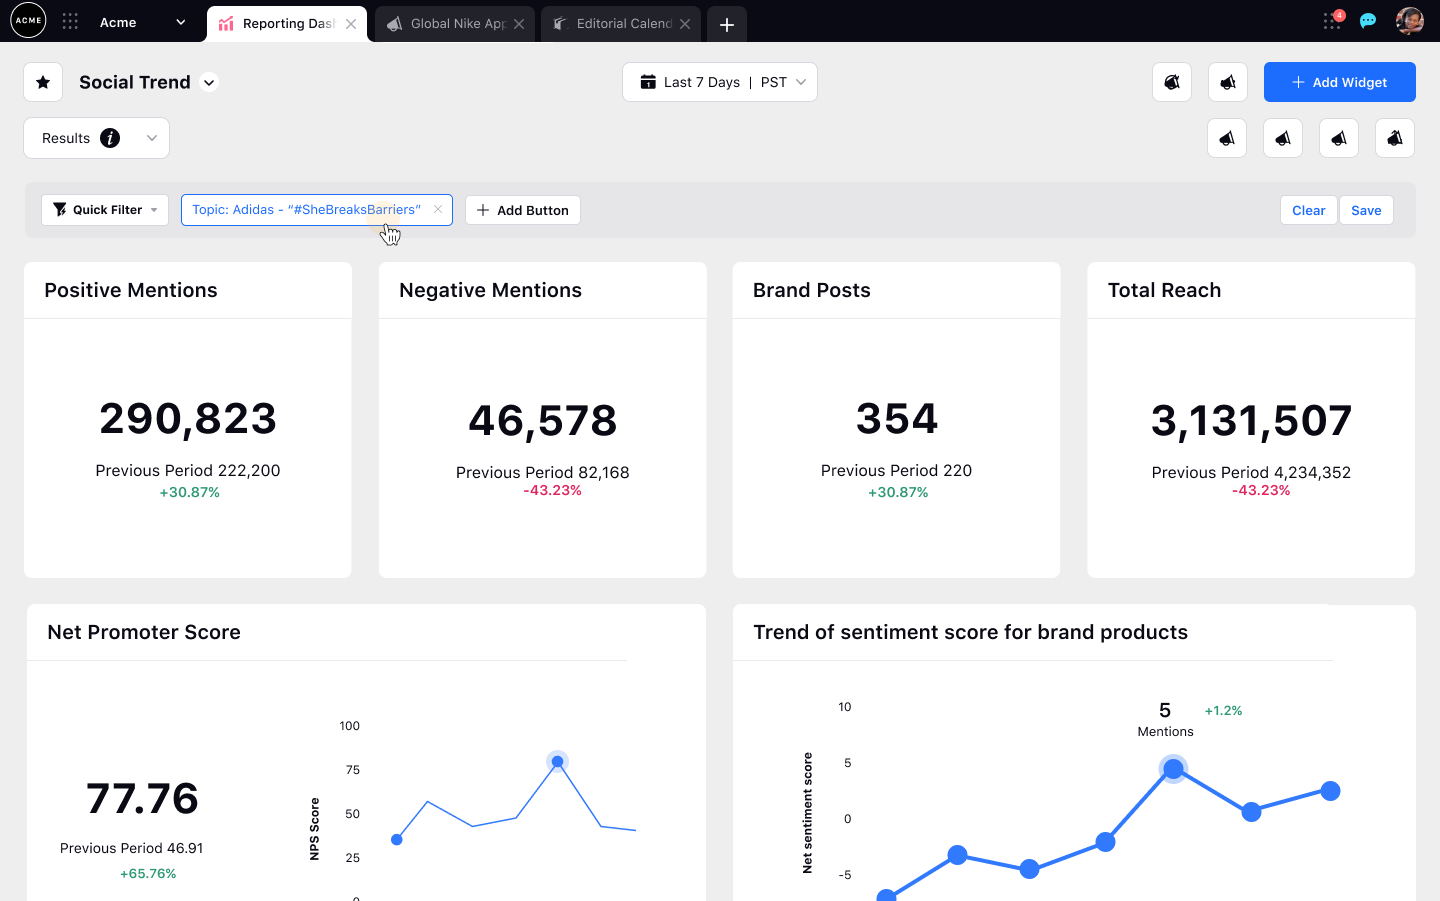 A Sprinklr reporting dashboard displays the key highlights of a social media campaign.